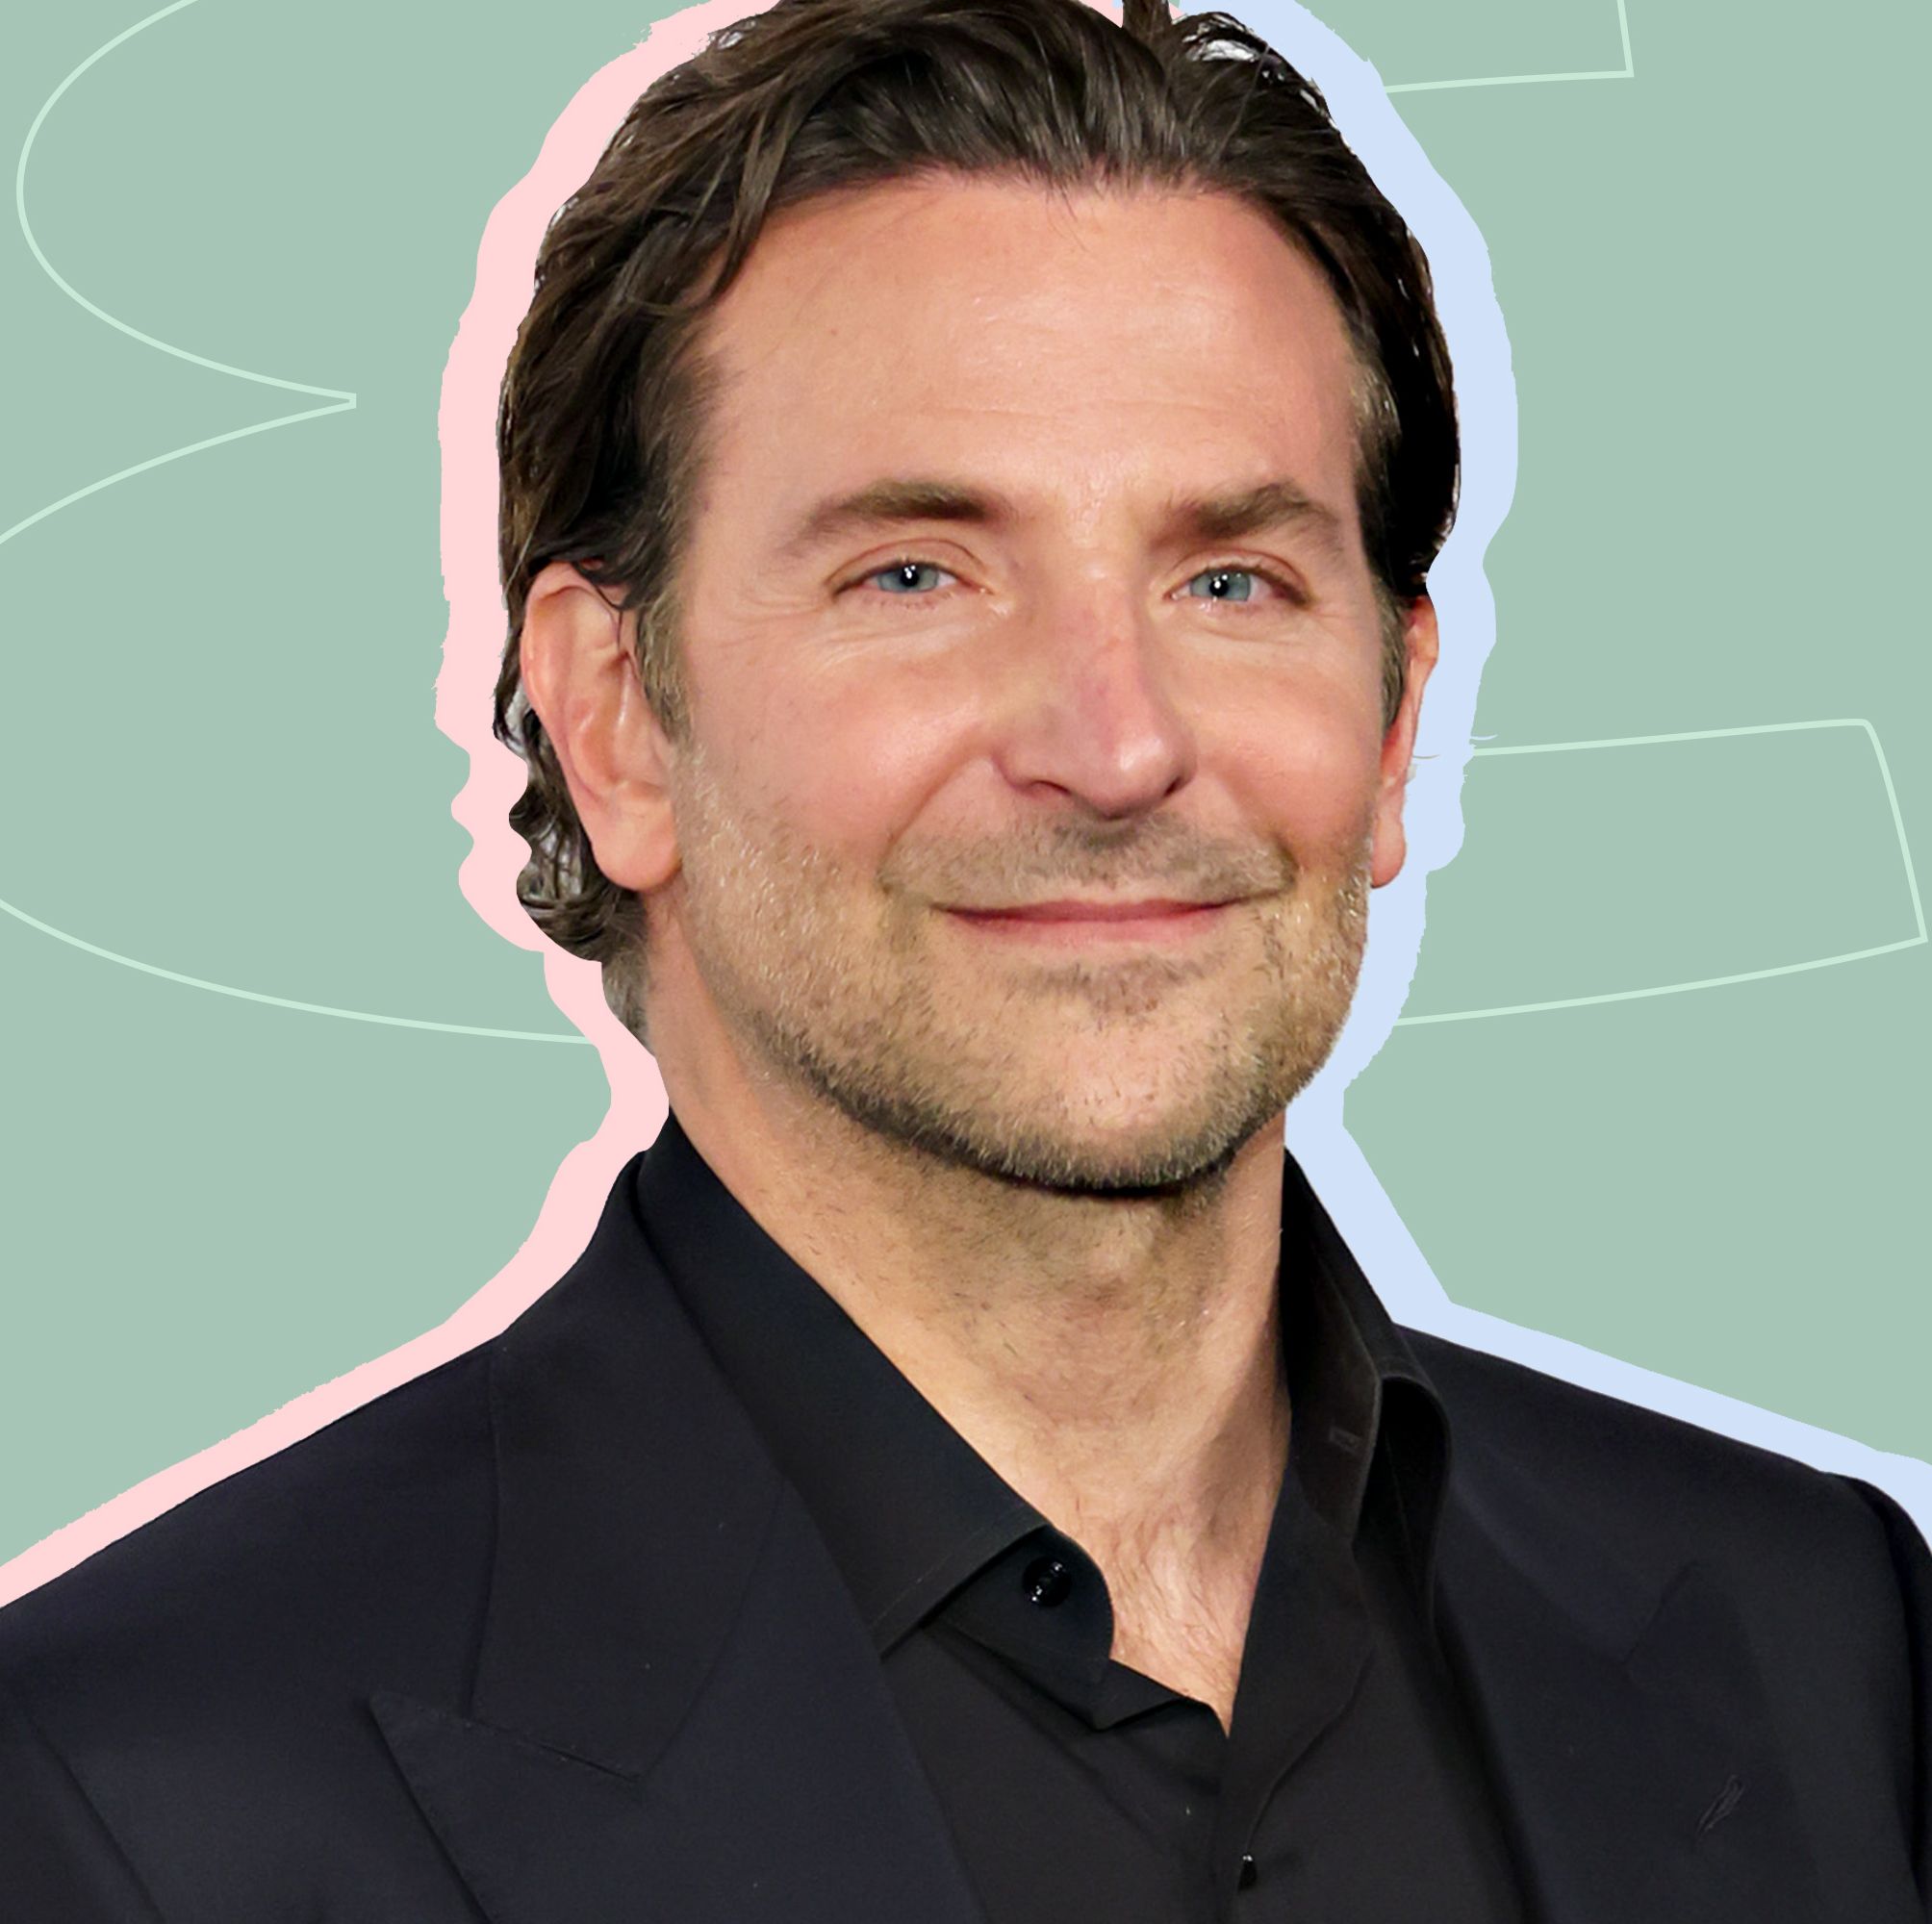 Bradley Cooper's <i>Dungeons & Dragons</i> Cameo Is Freaking Me Out